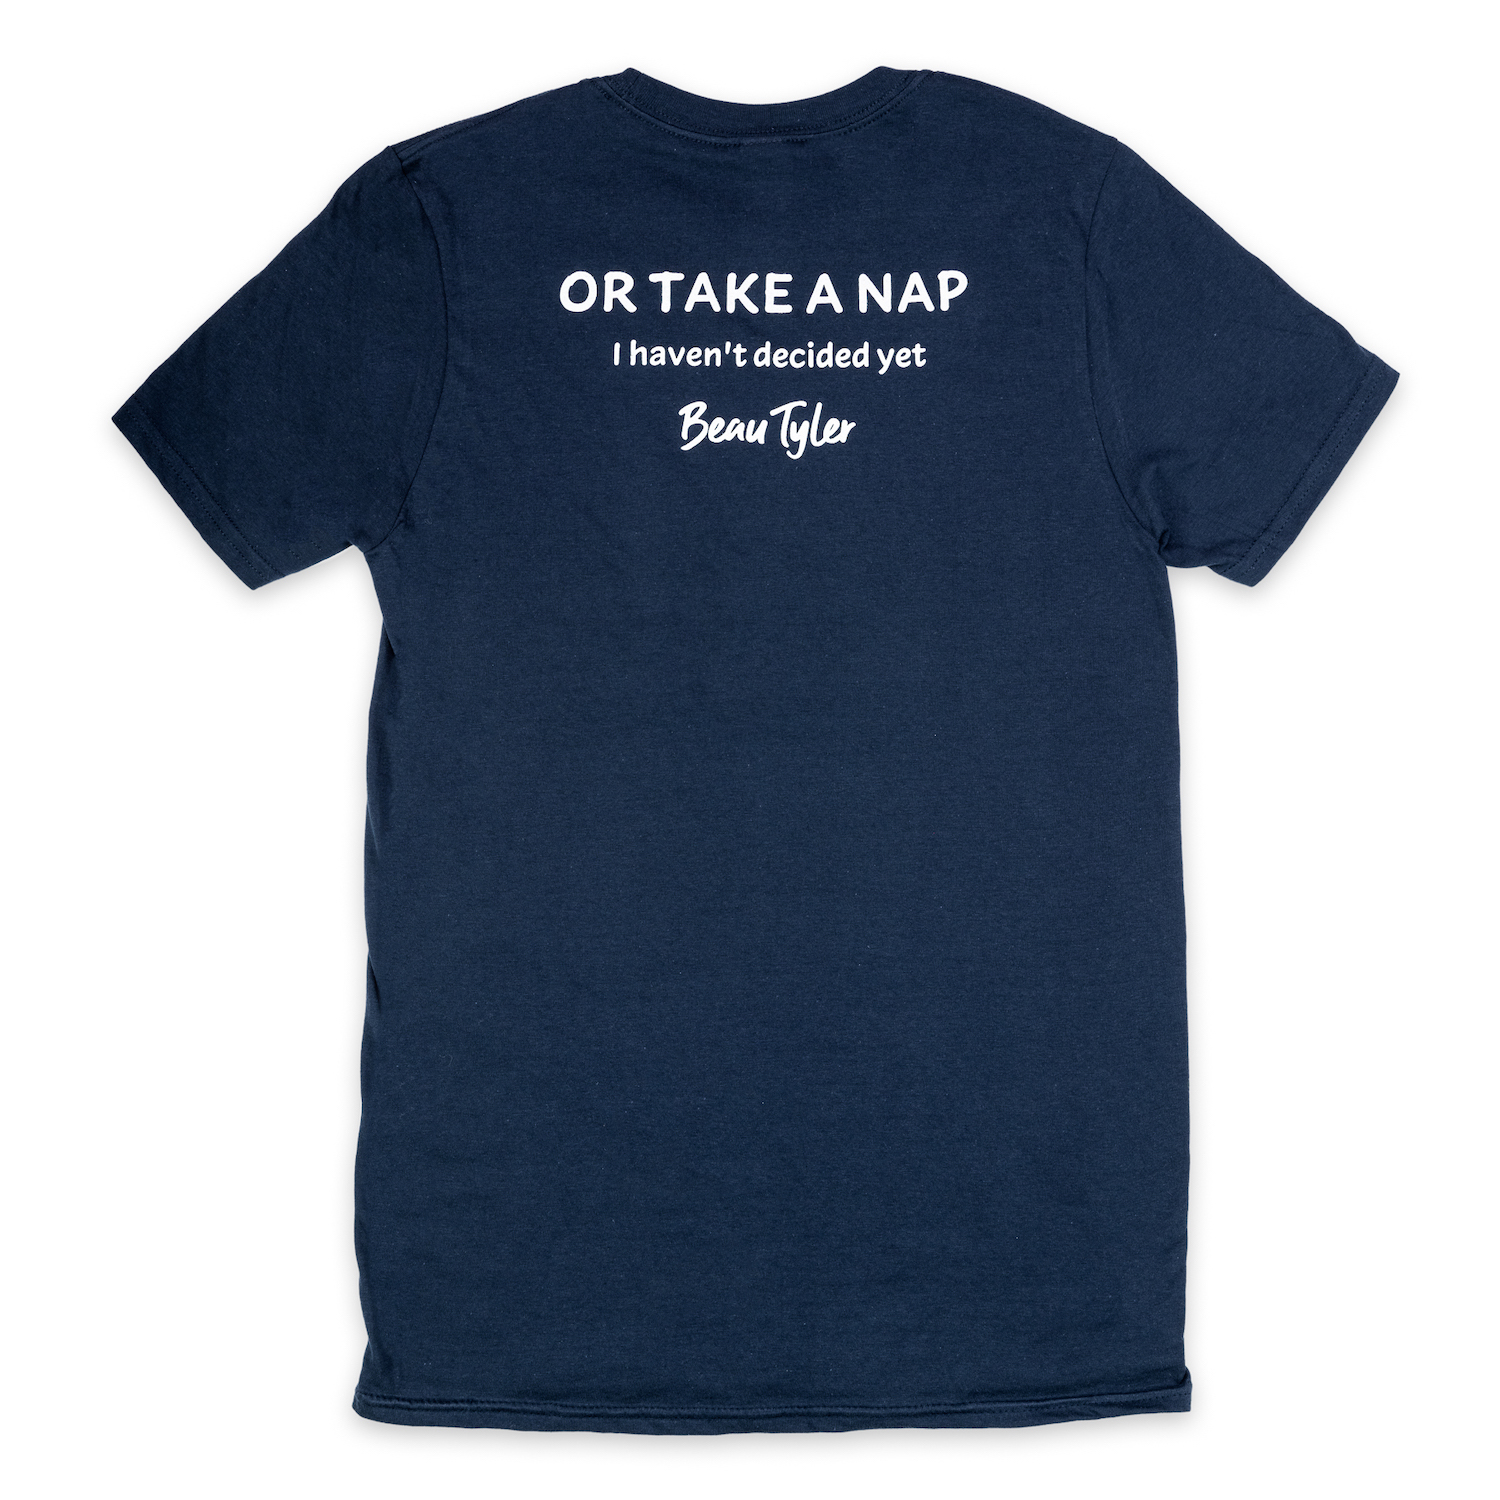 Beau Tyler - I'm here to change the world or take a nap shirt unisex back